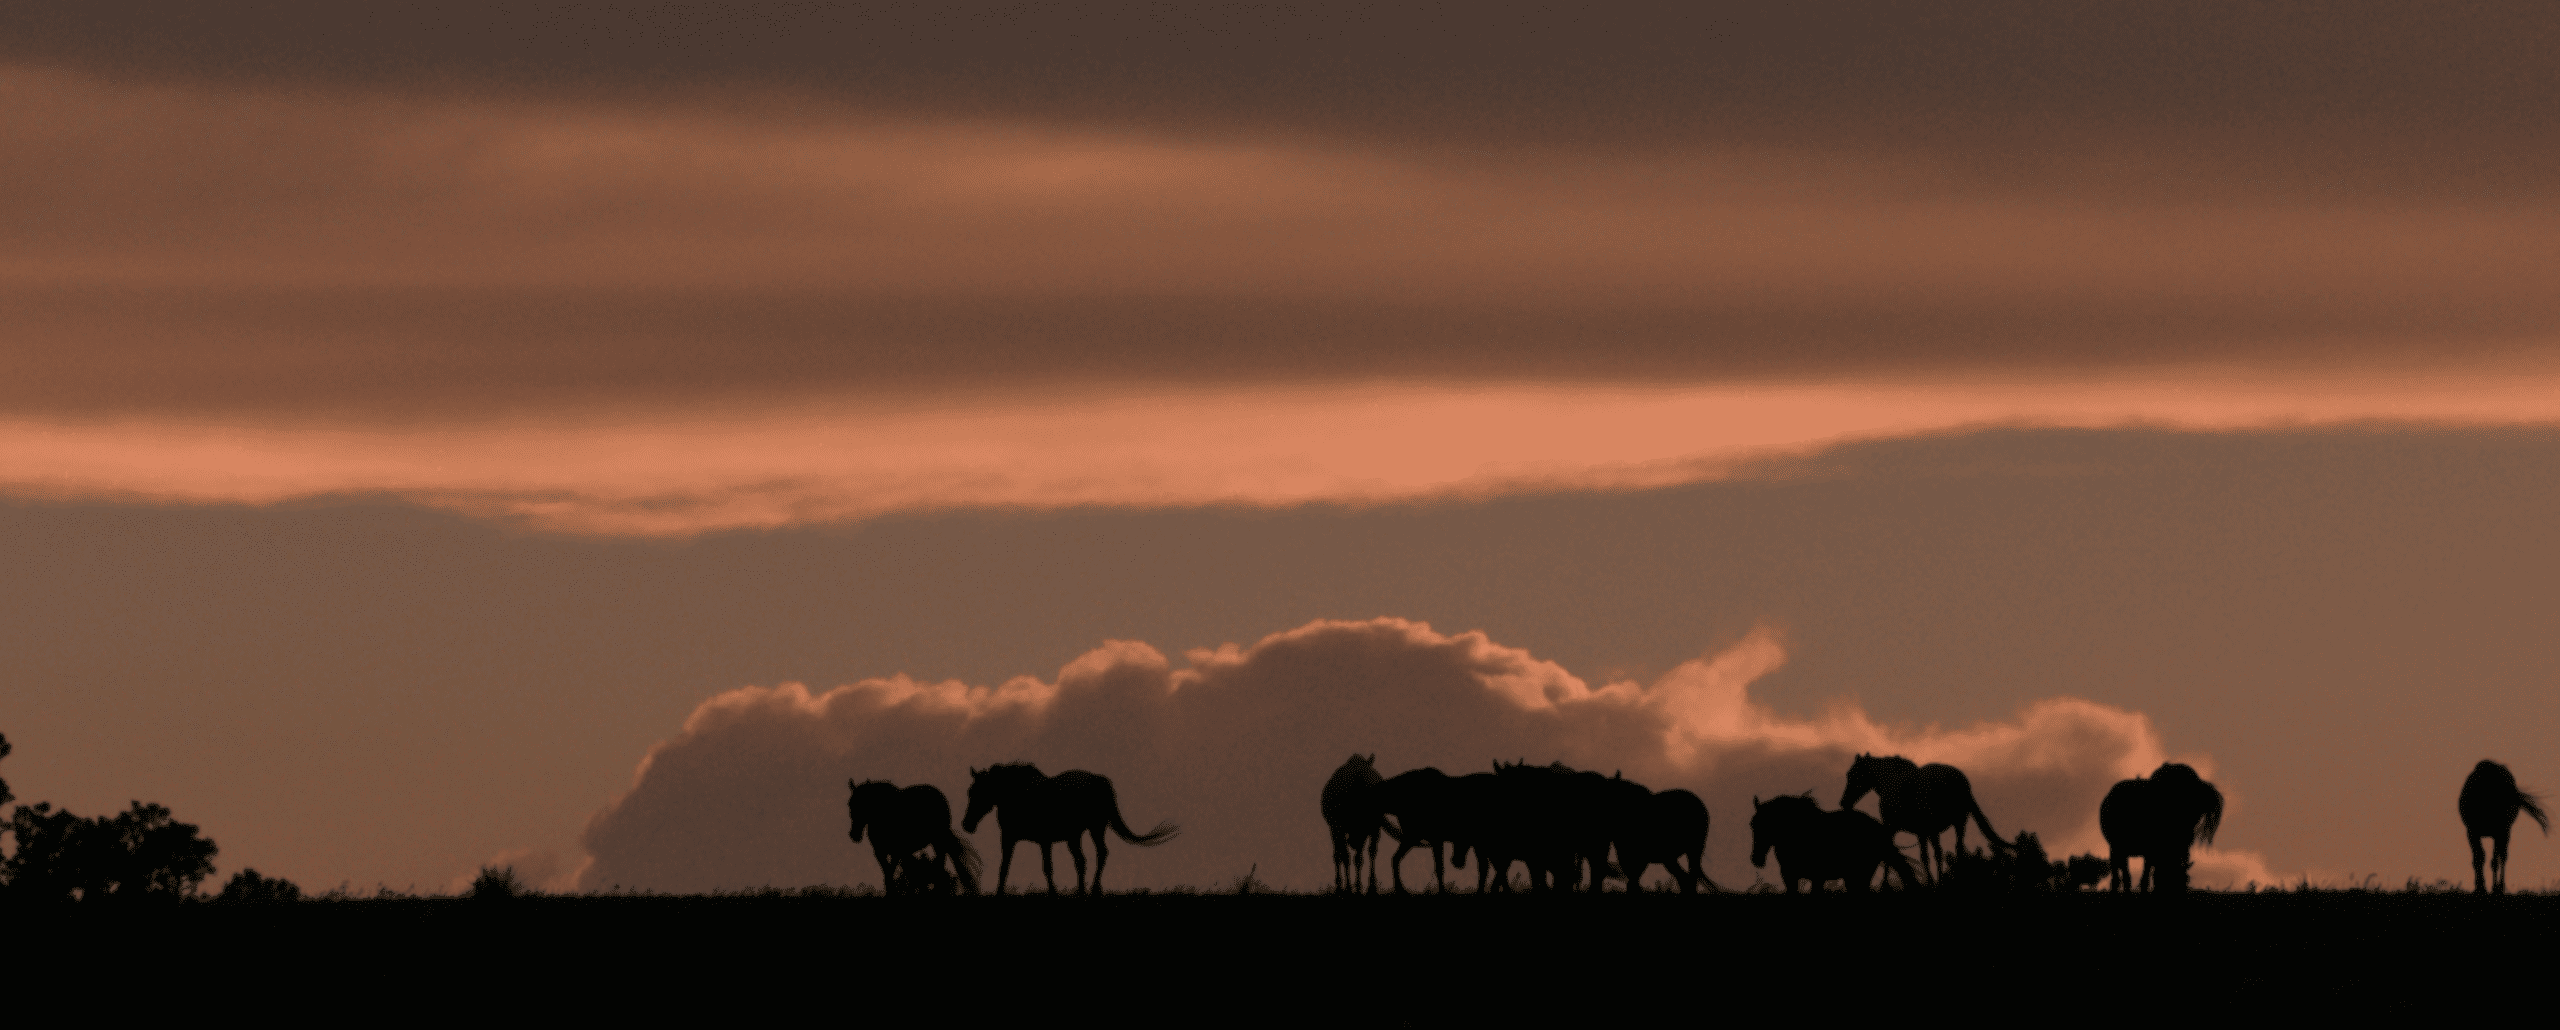 Shadow Horses in the Clouds from Wild Beauty